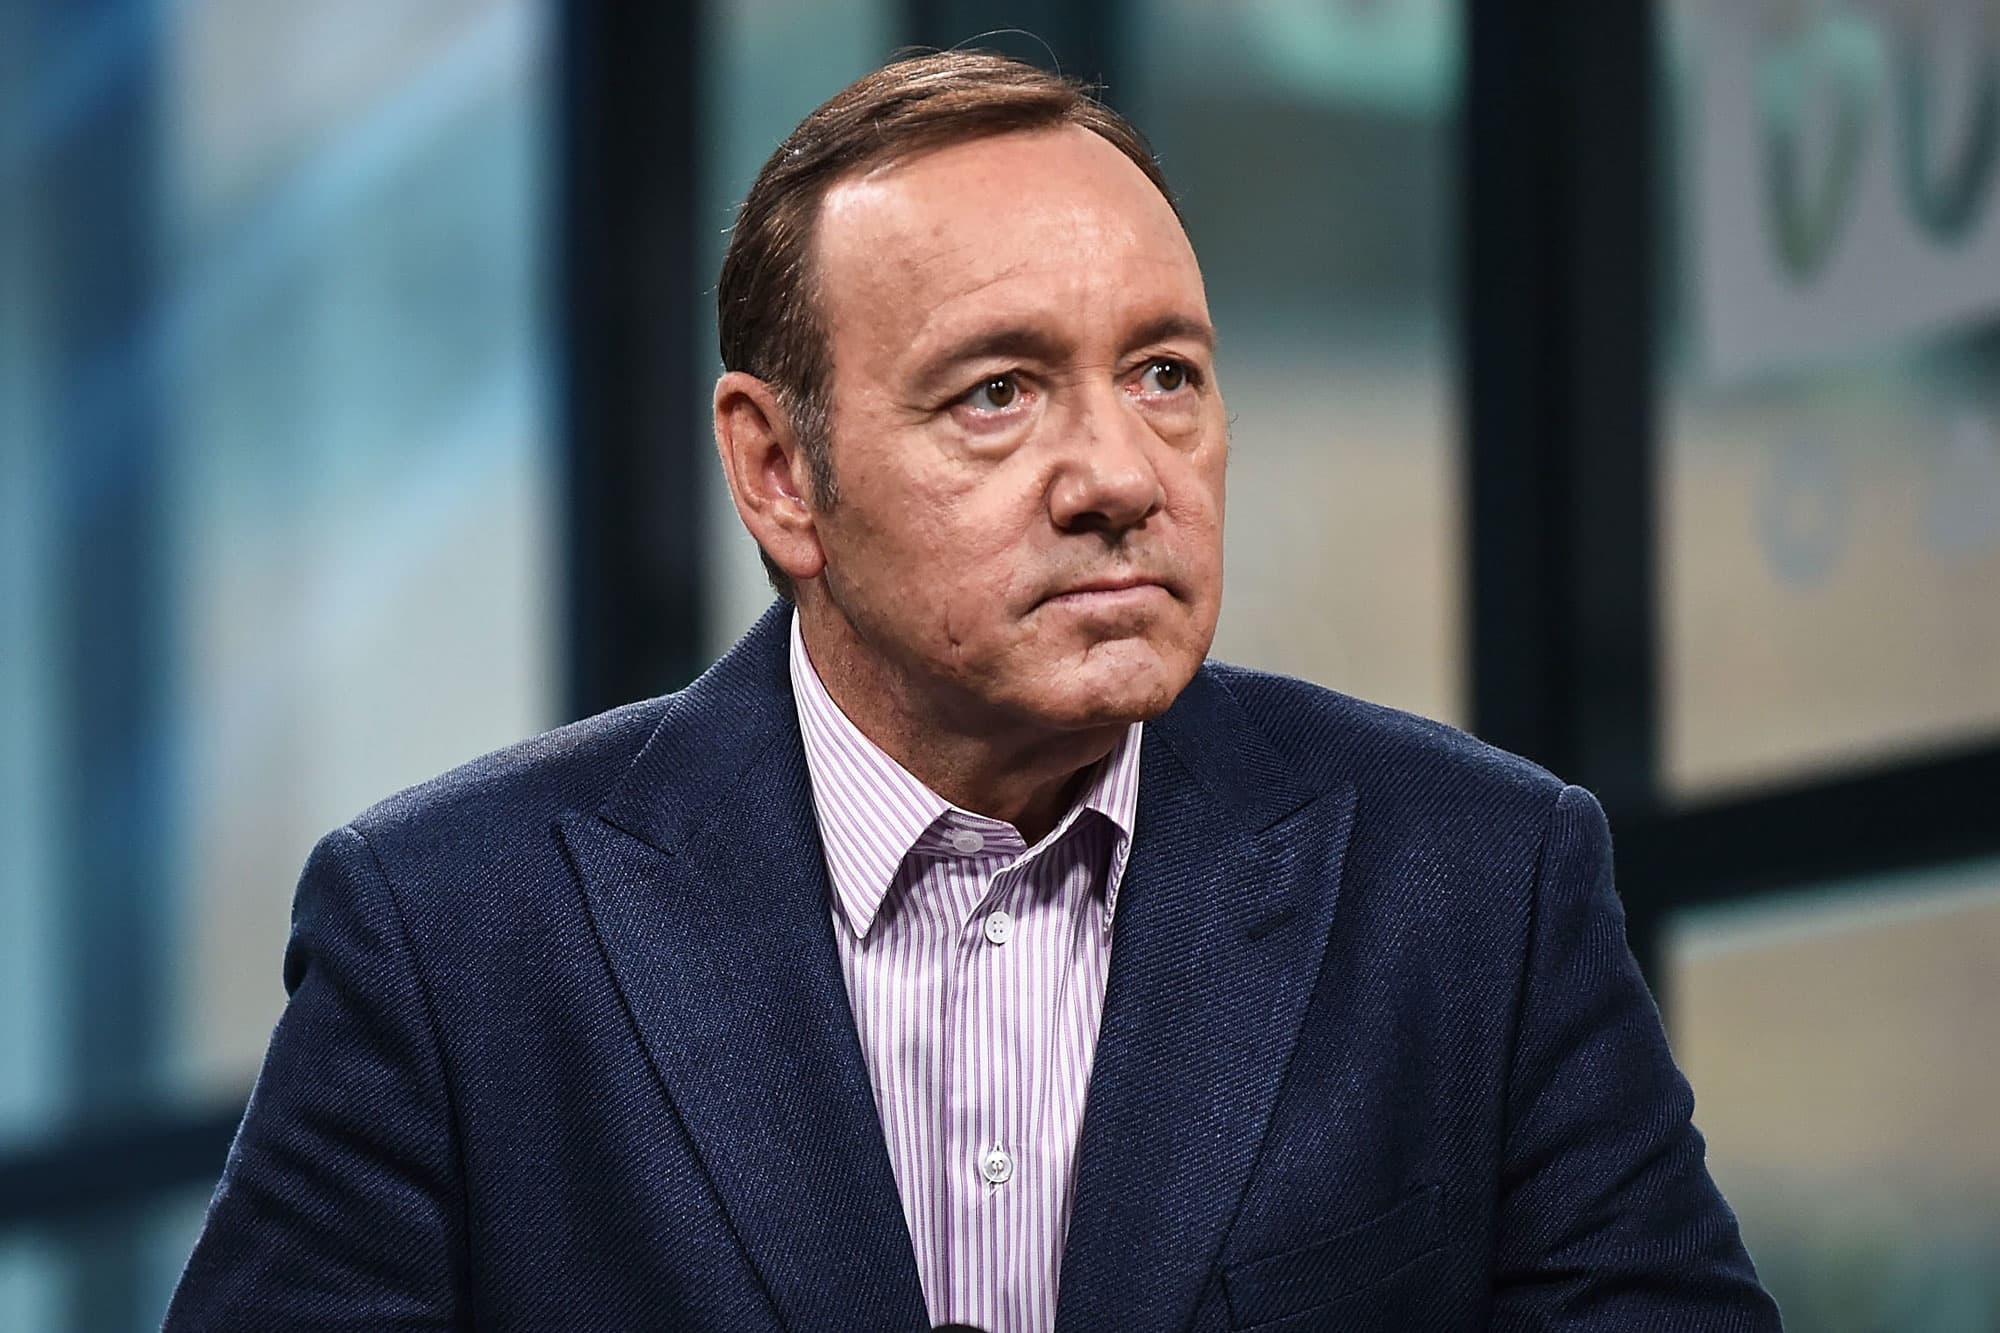 Kevin Spacey ordered to pay Netflix show studio over misconduct